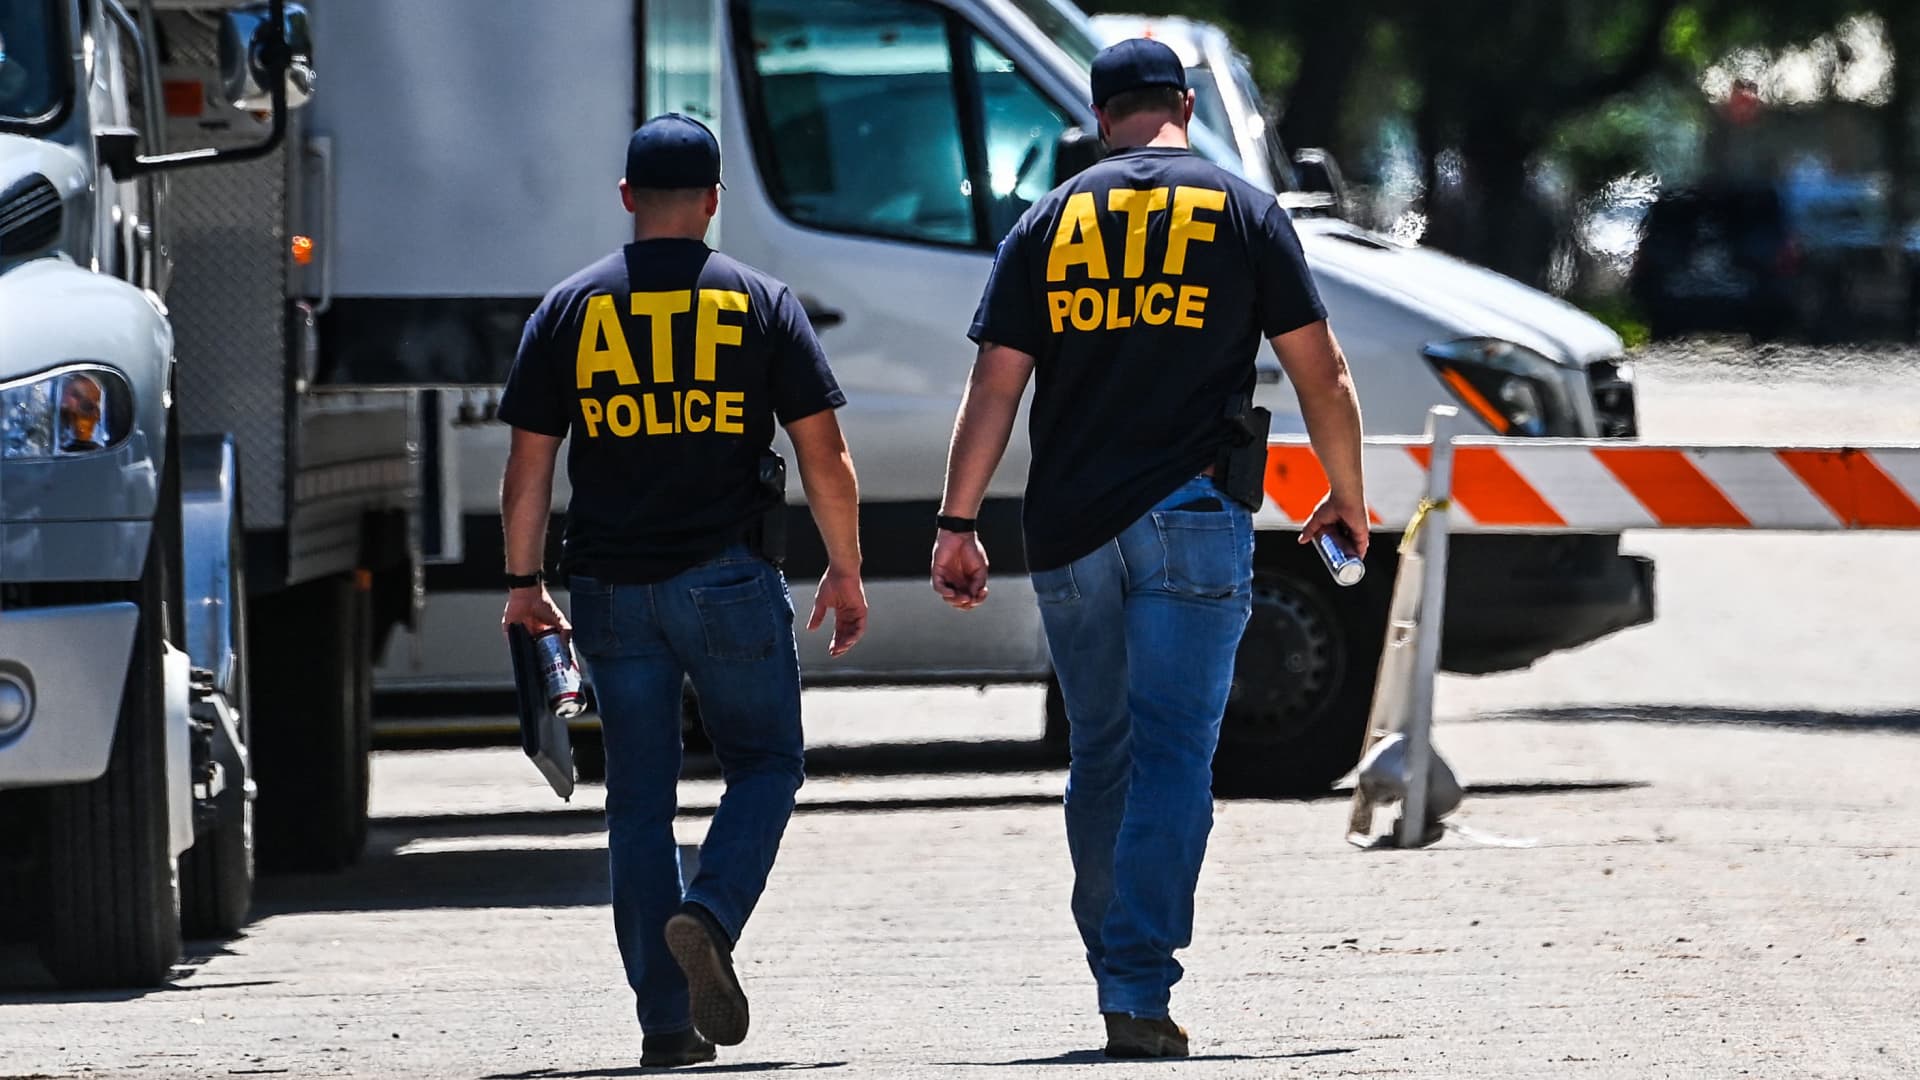 ATF broke the legislation by spending agents hundreds of thousands in wrongful gains, watchdog tells Biden